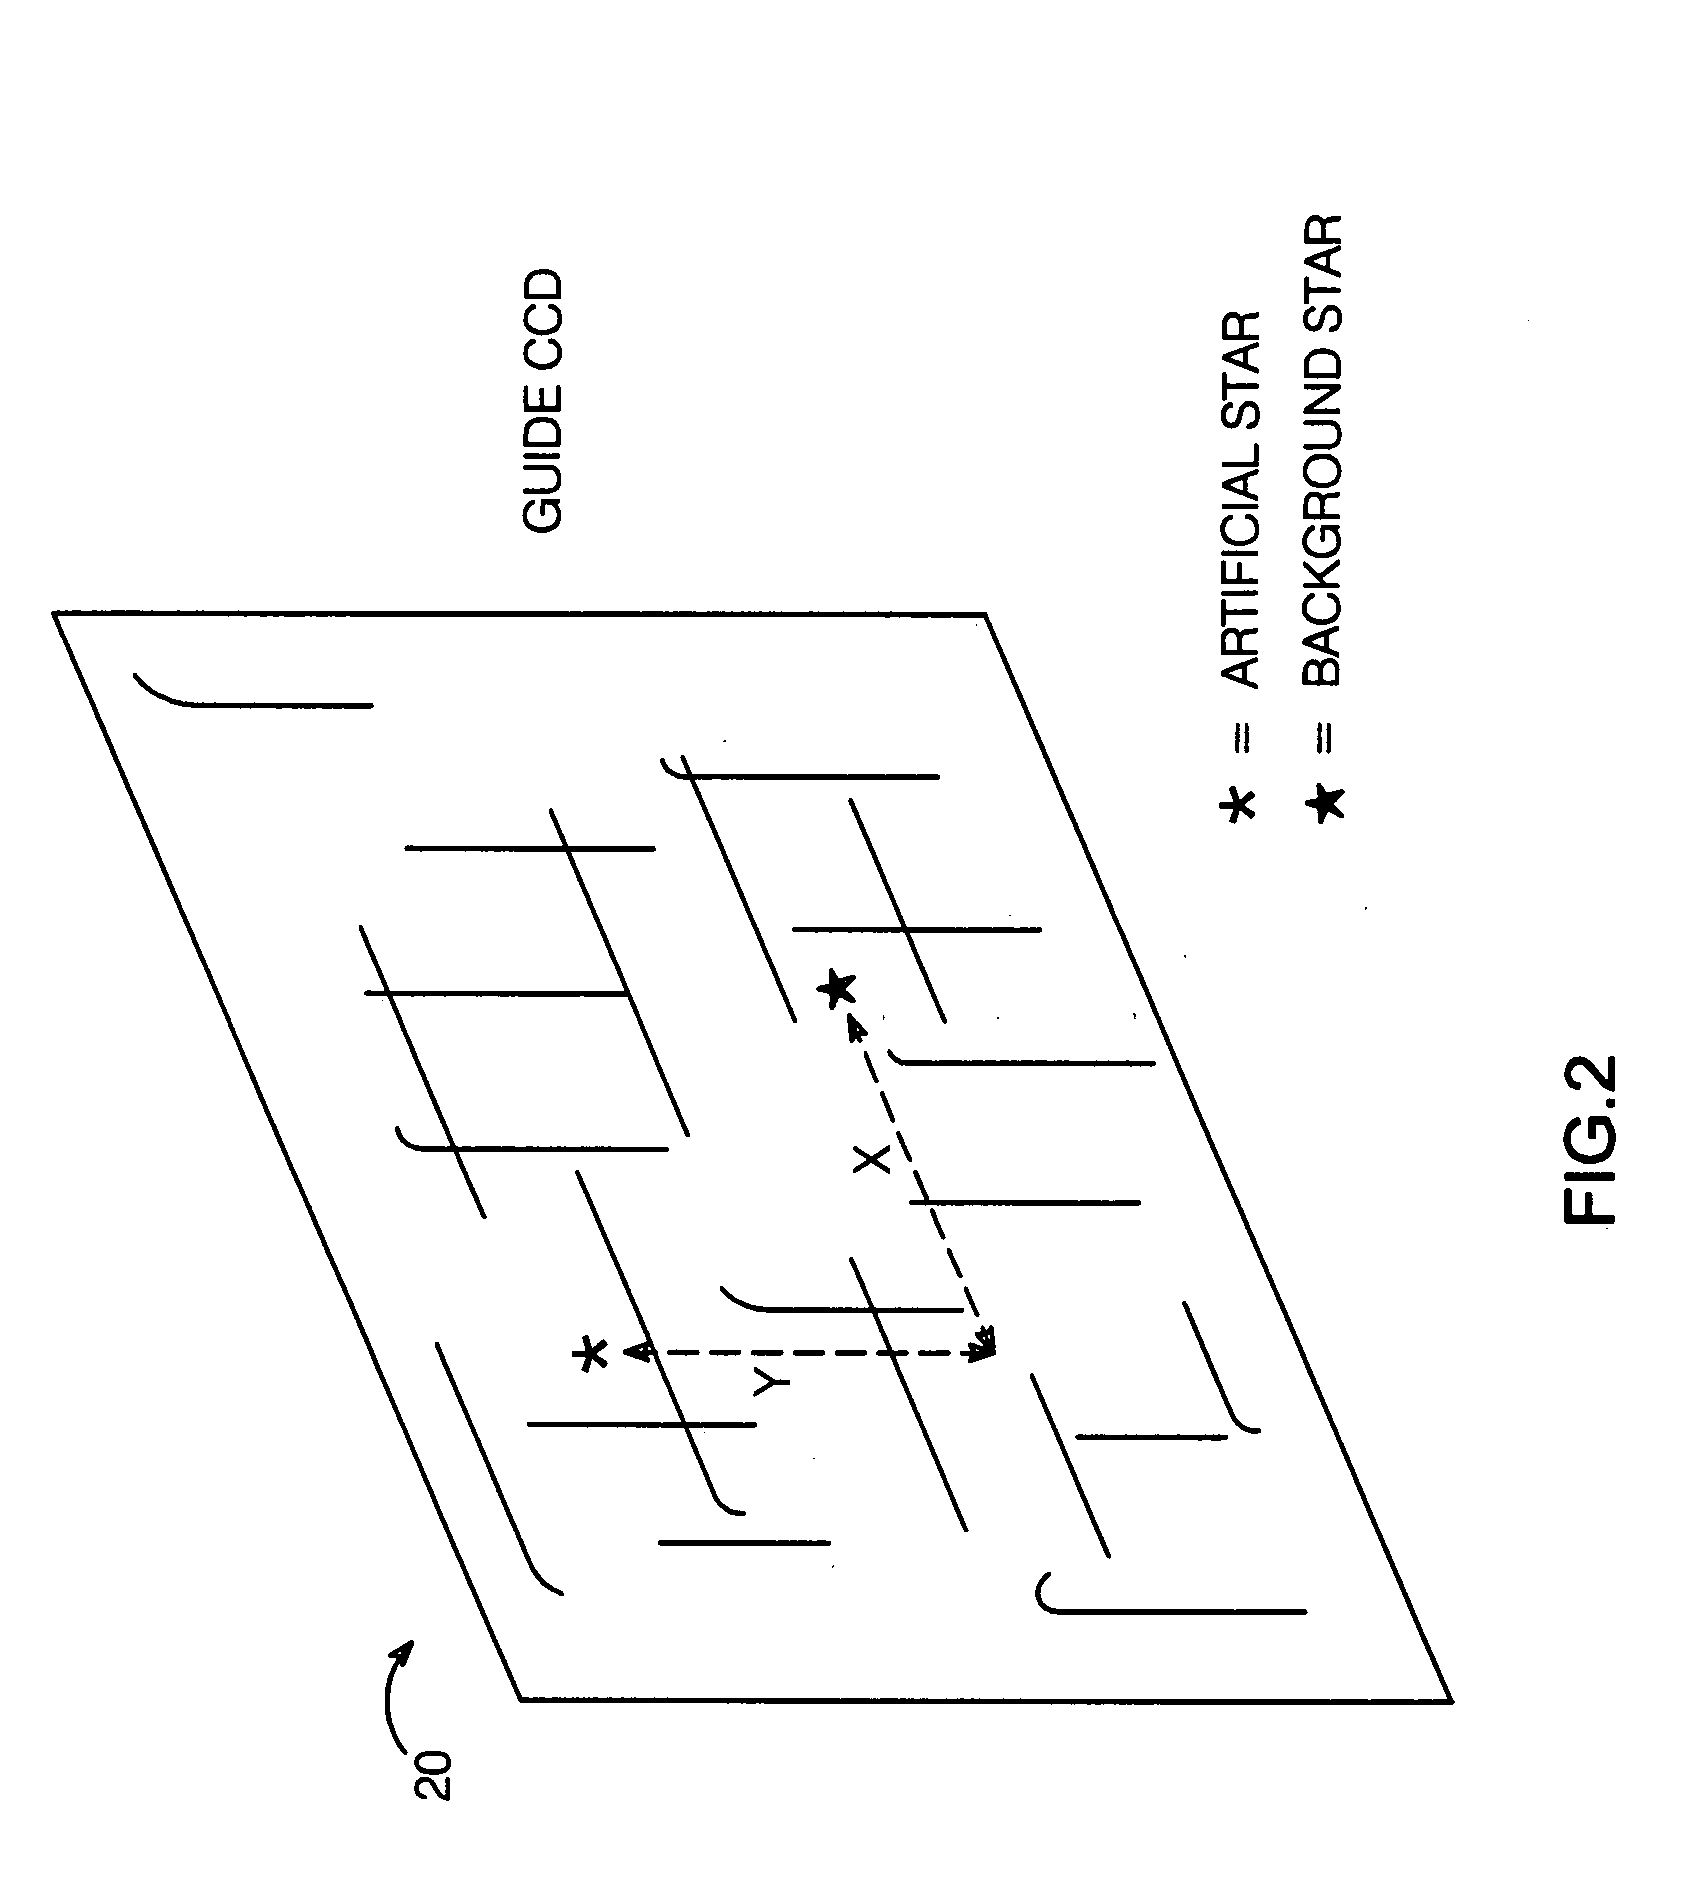 System and method for telescope guiding utilizing an artificial reference star